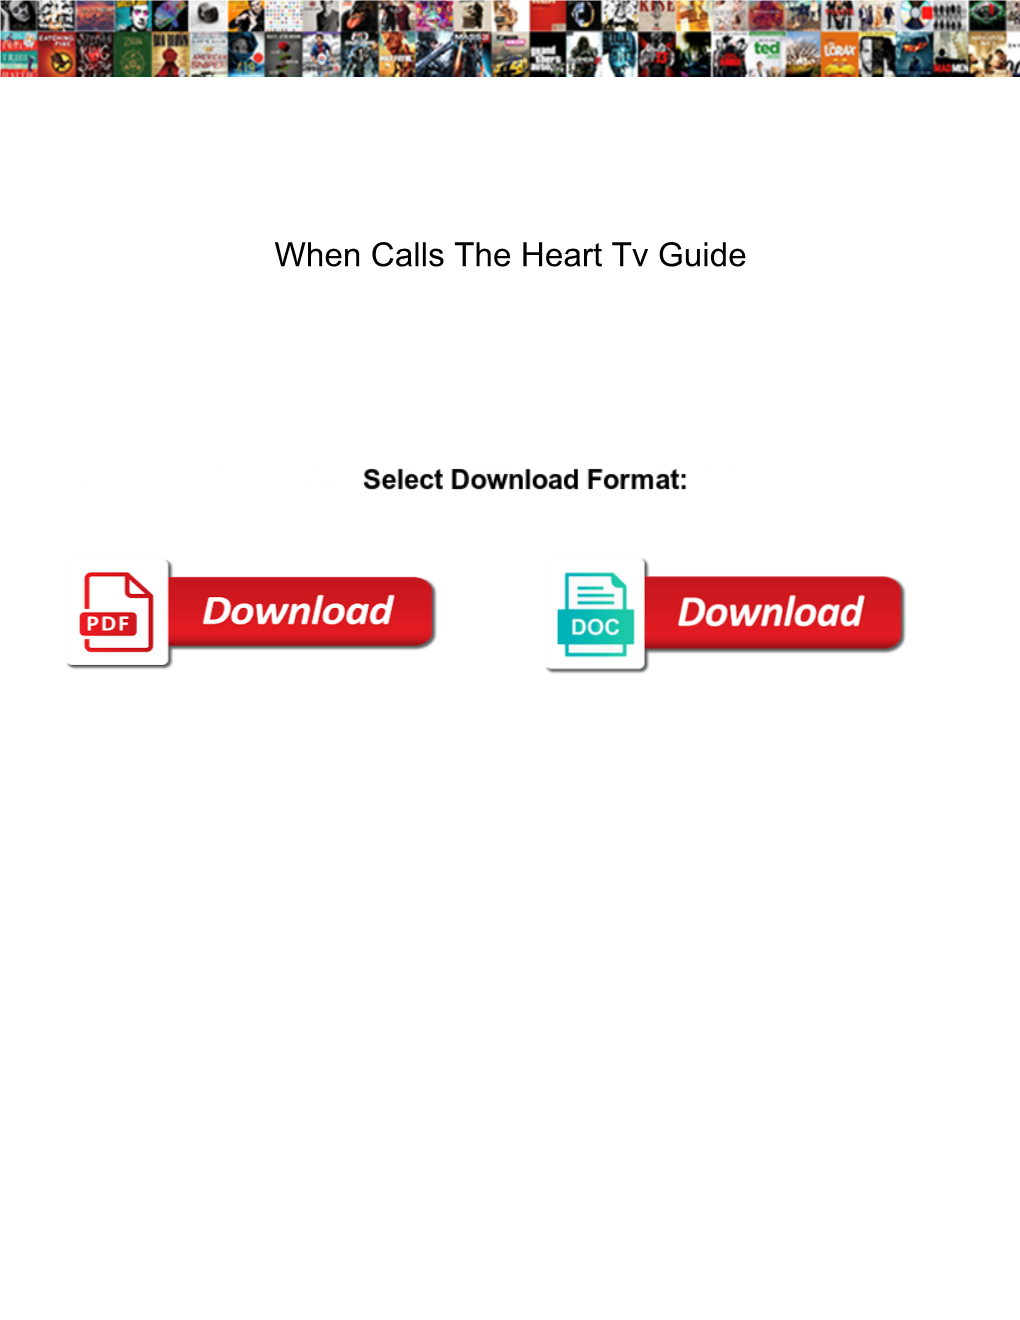 When Calls the Heart Tv Guide